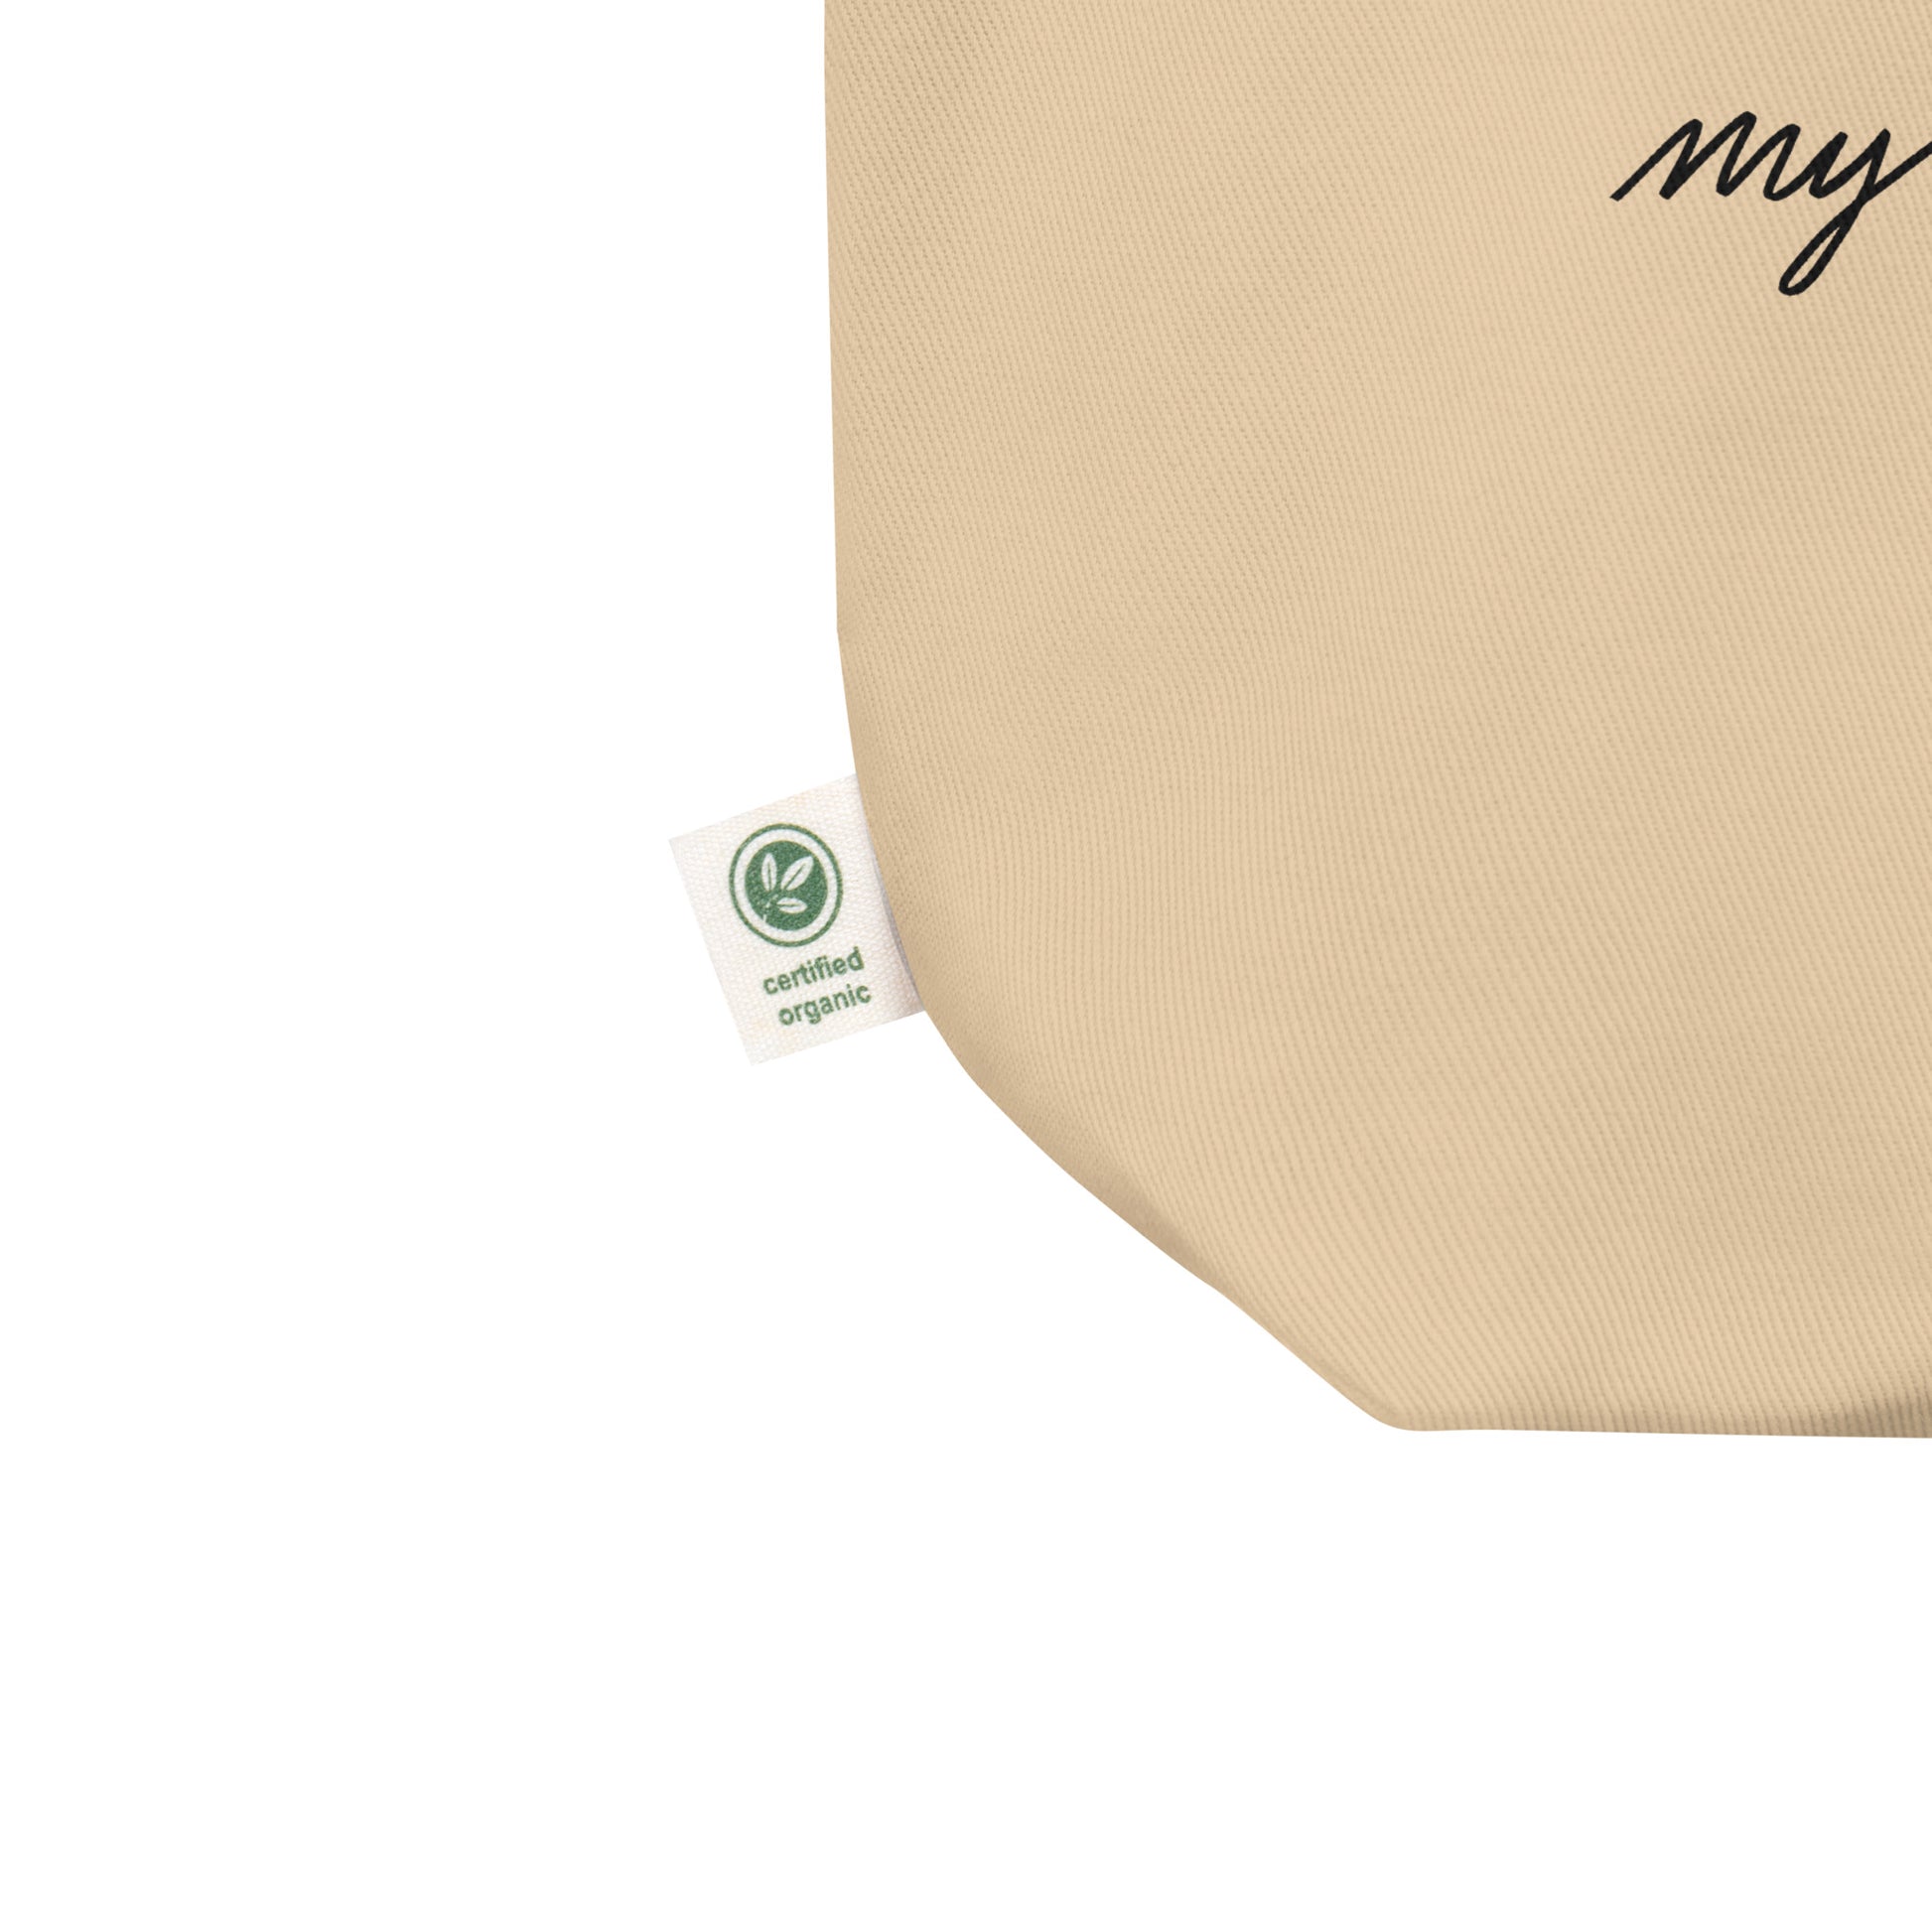 close up view of rounded bottom edge of organic cotton tote bag displaying its small certified organic tag.